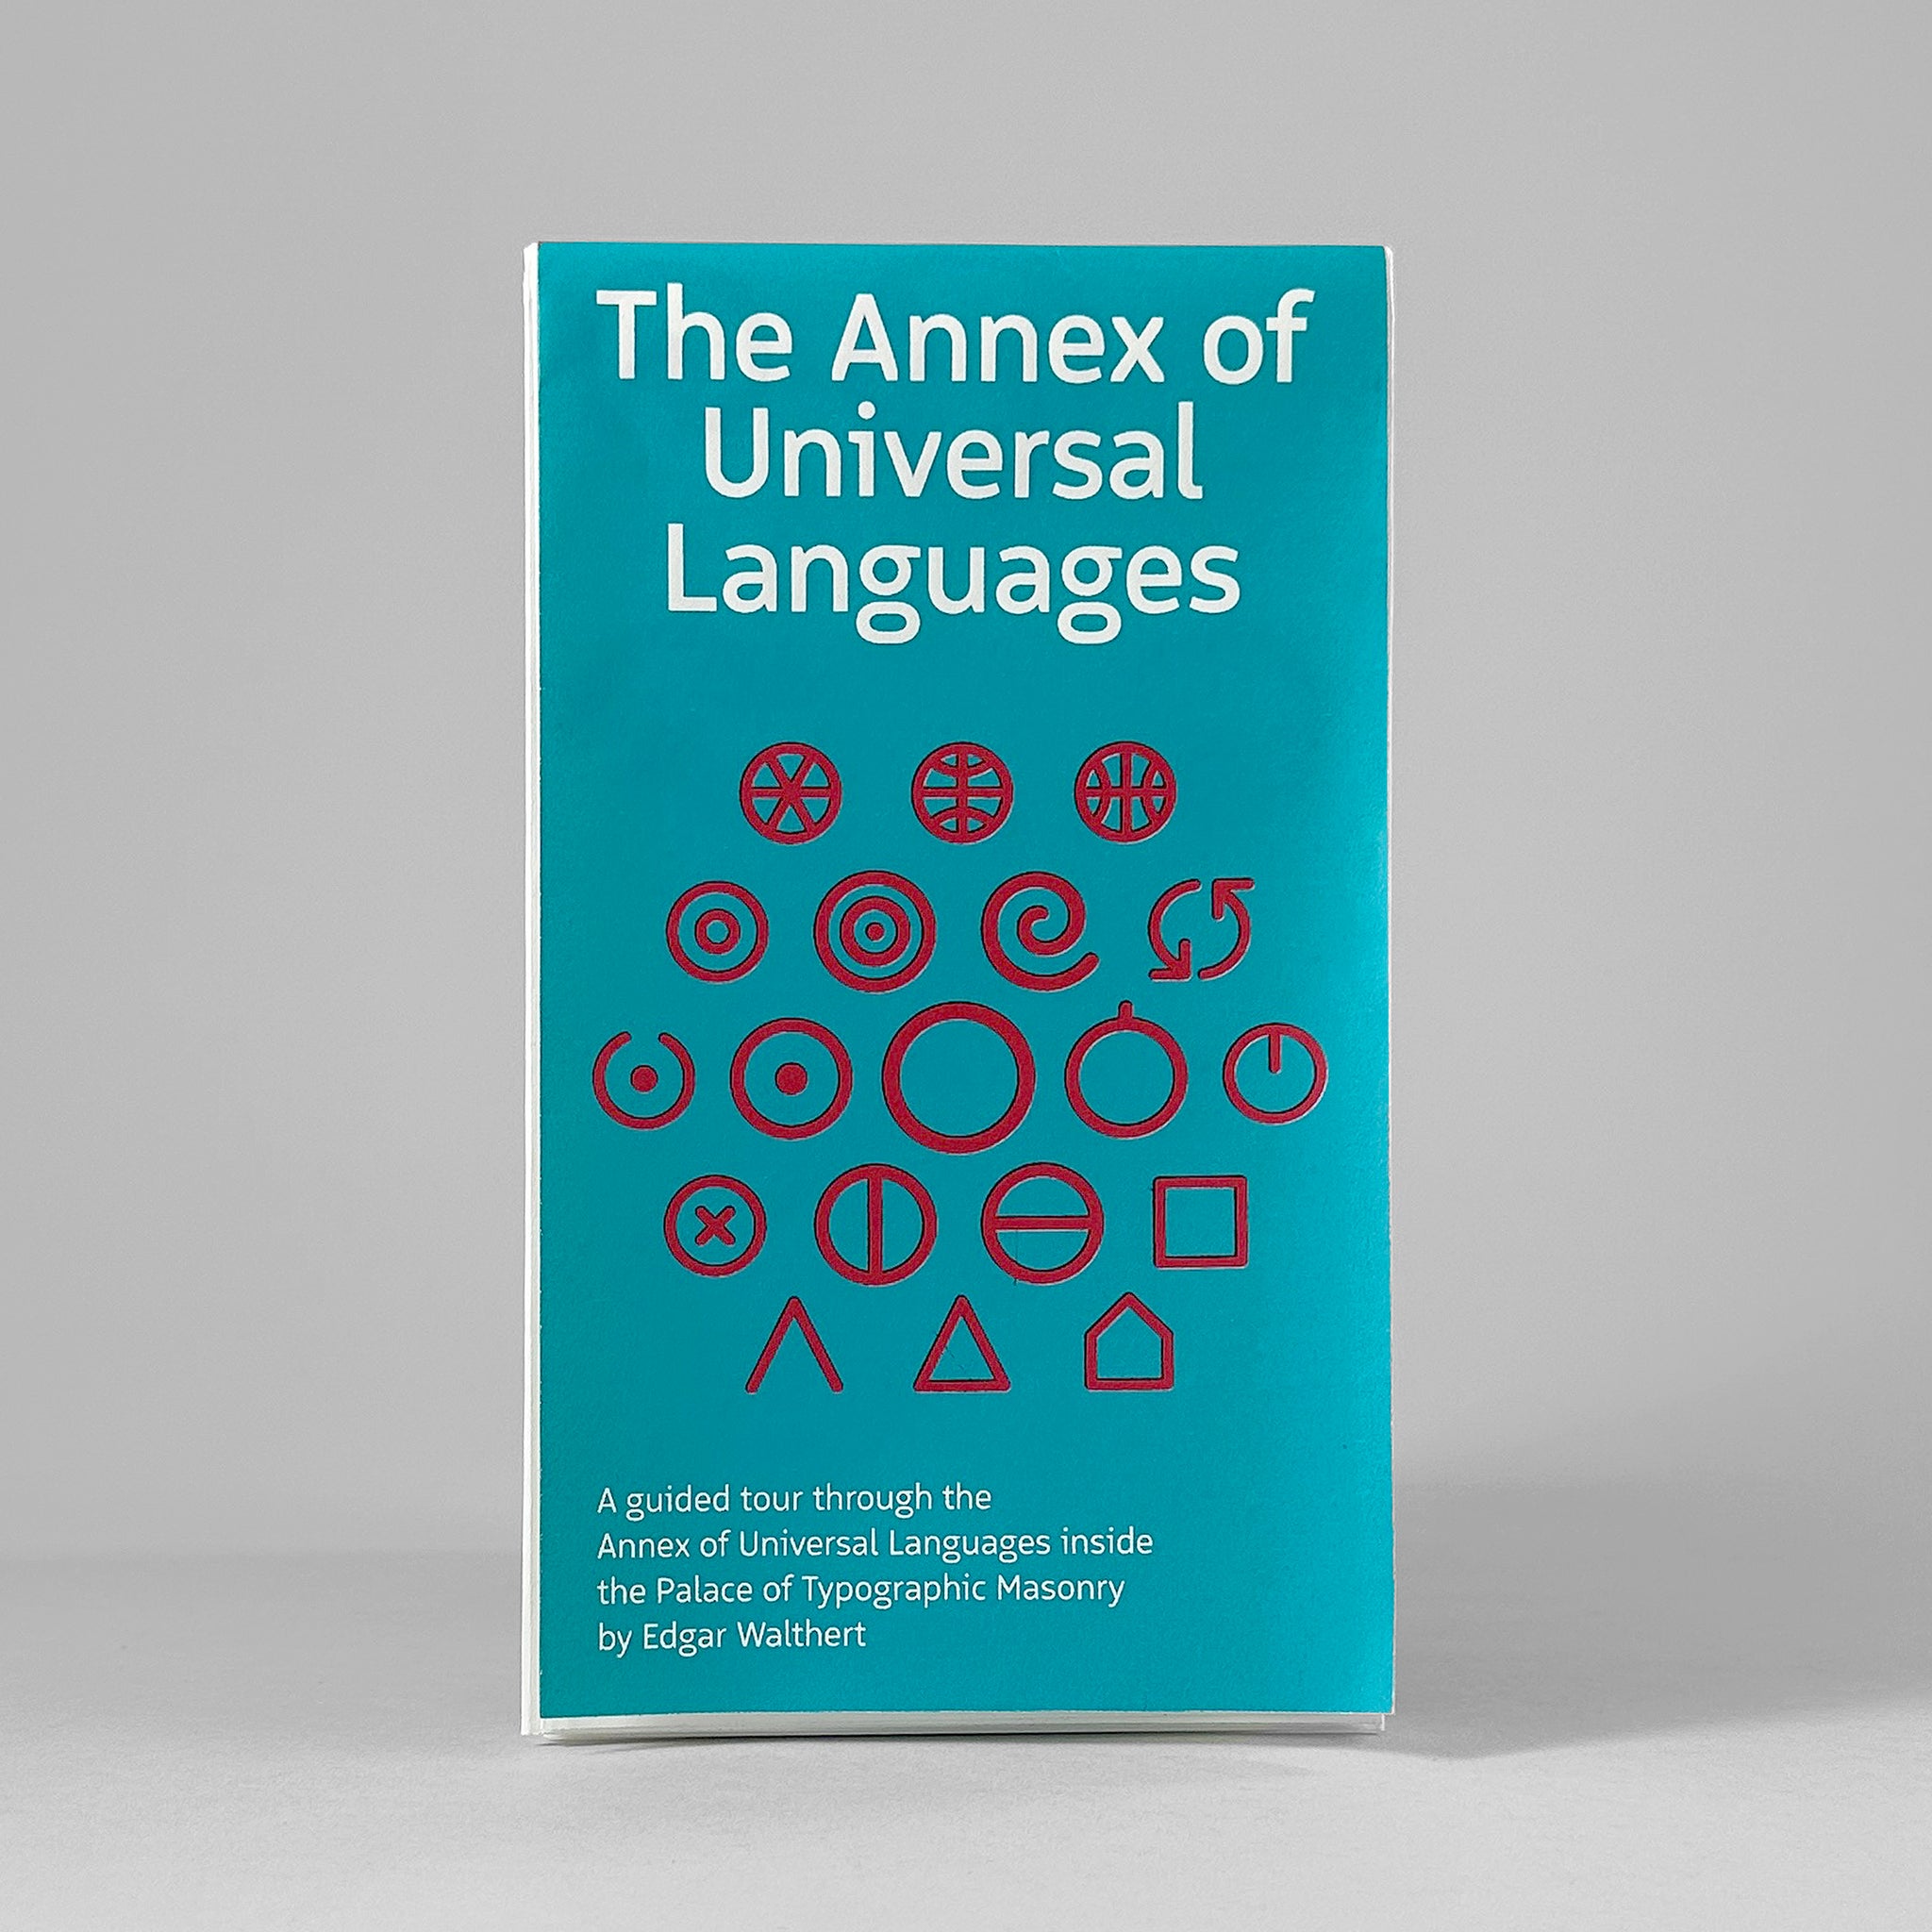 The Annex of Universal Languages